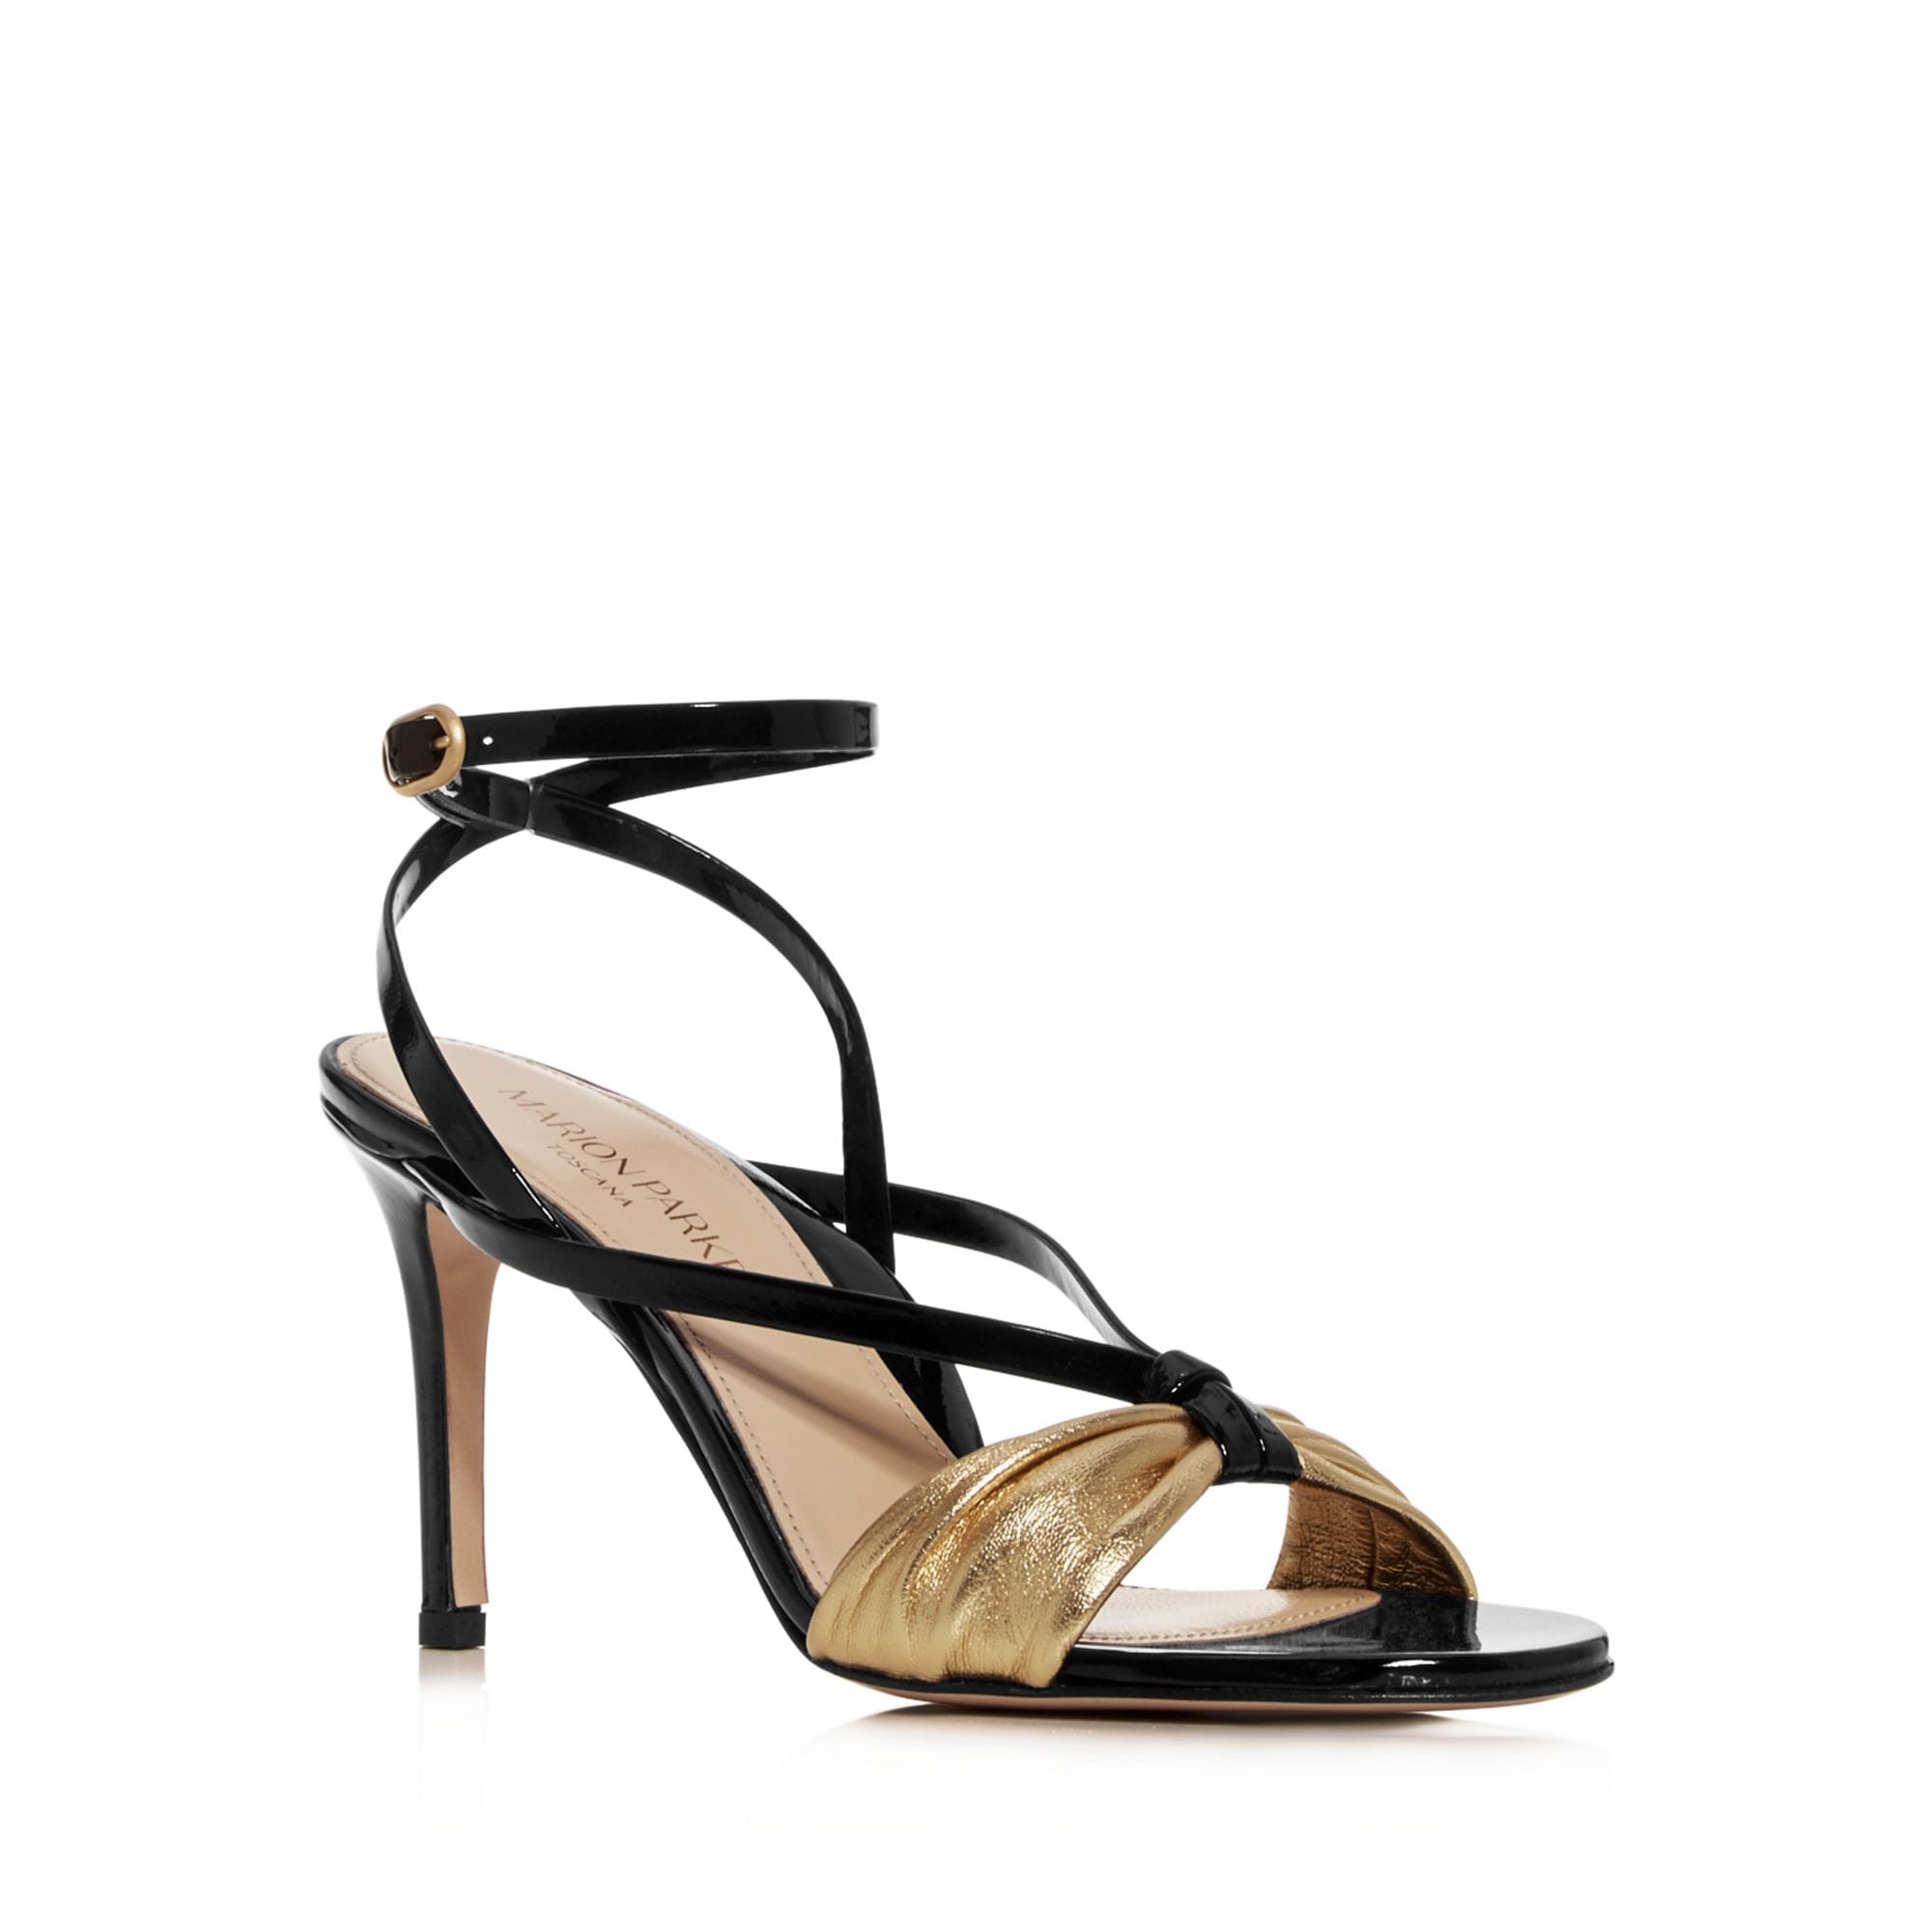 woocommerce-673321-2209615.cloudwaysapps.com-marion-parke-womens-gold-black-patent-leather-lucy-strappy-stiletto-sandals